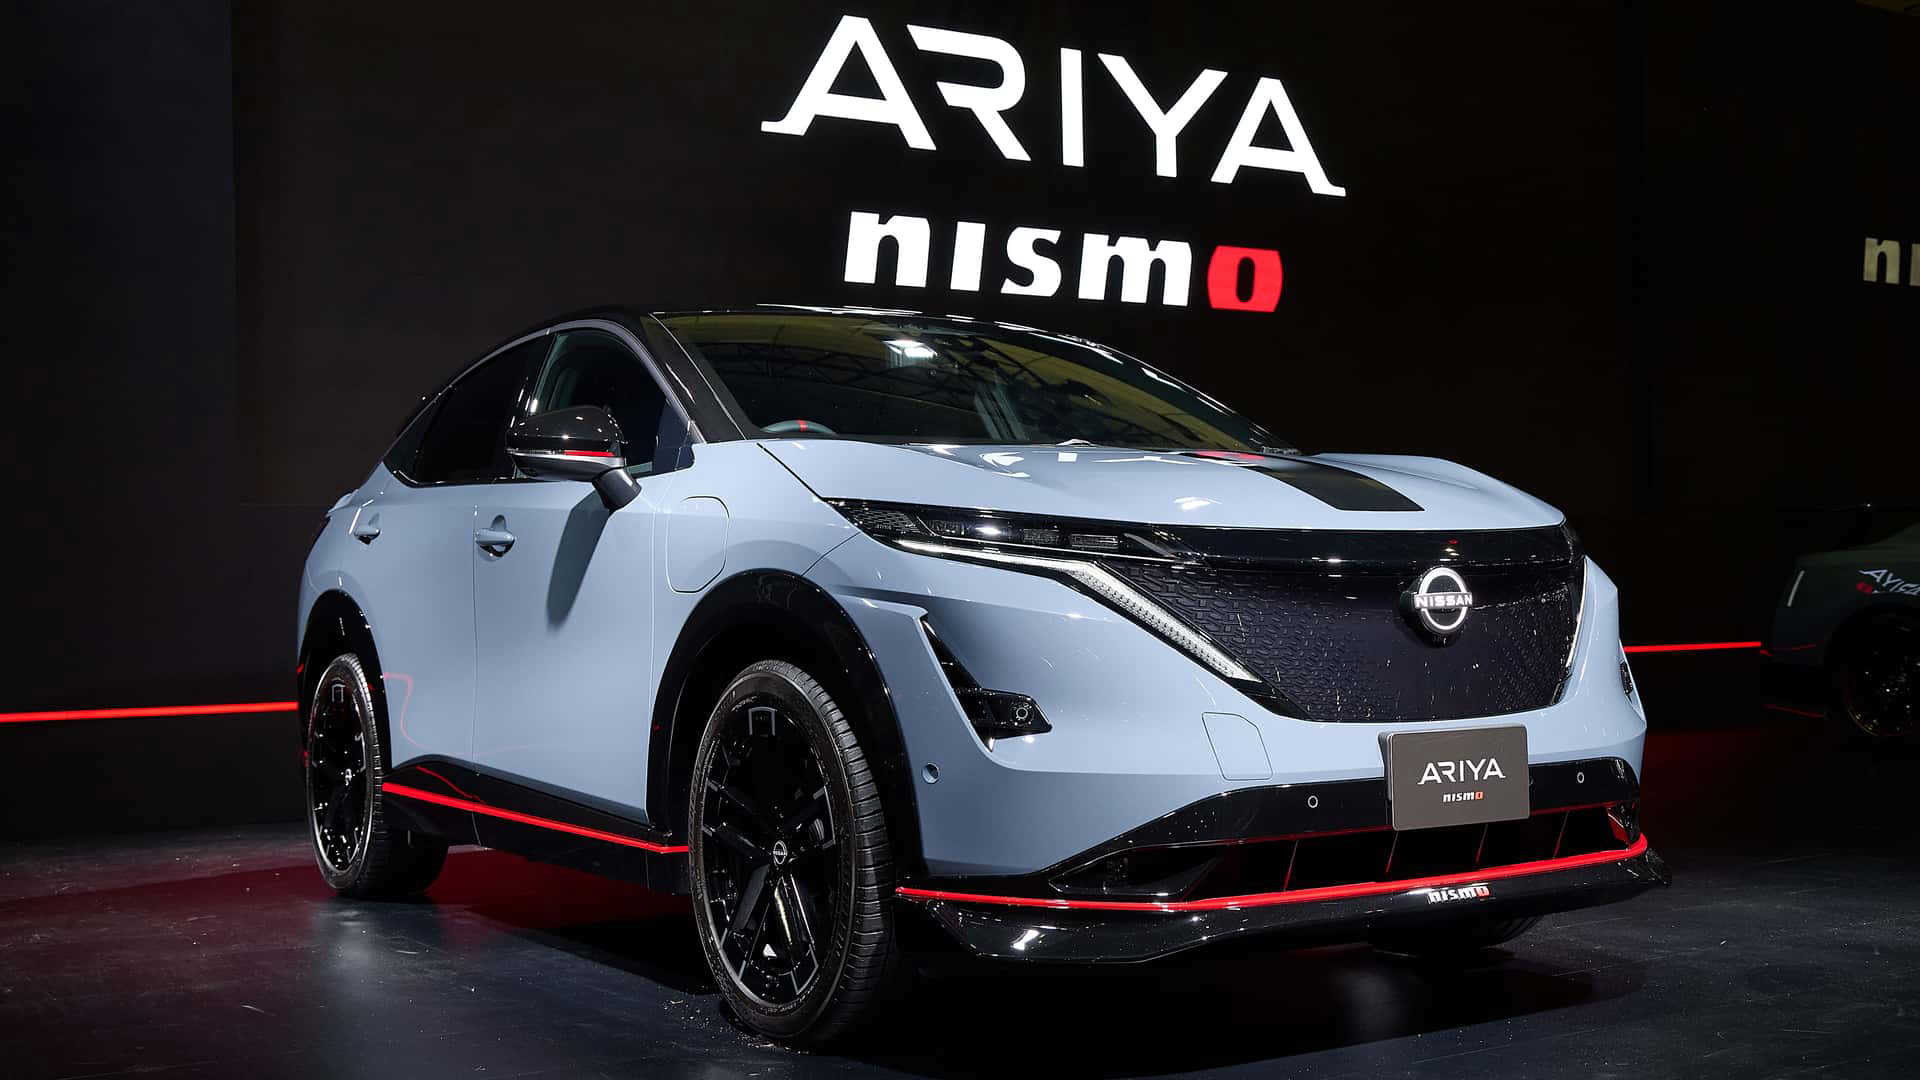 The First Electric Nismo Is A Nissan Ariya With 430 HP